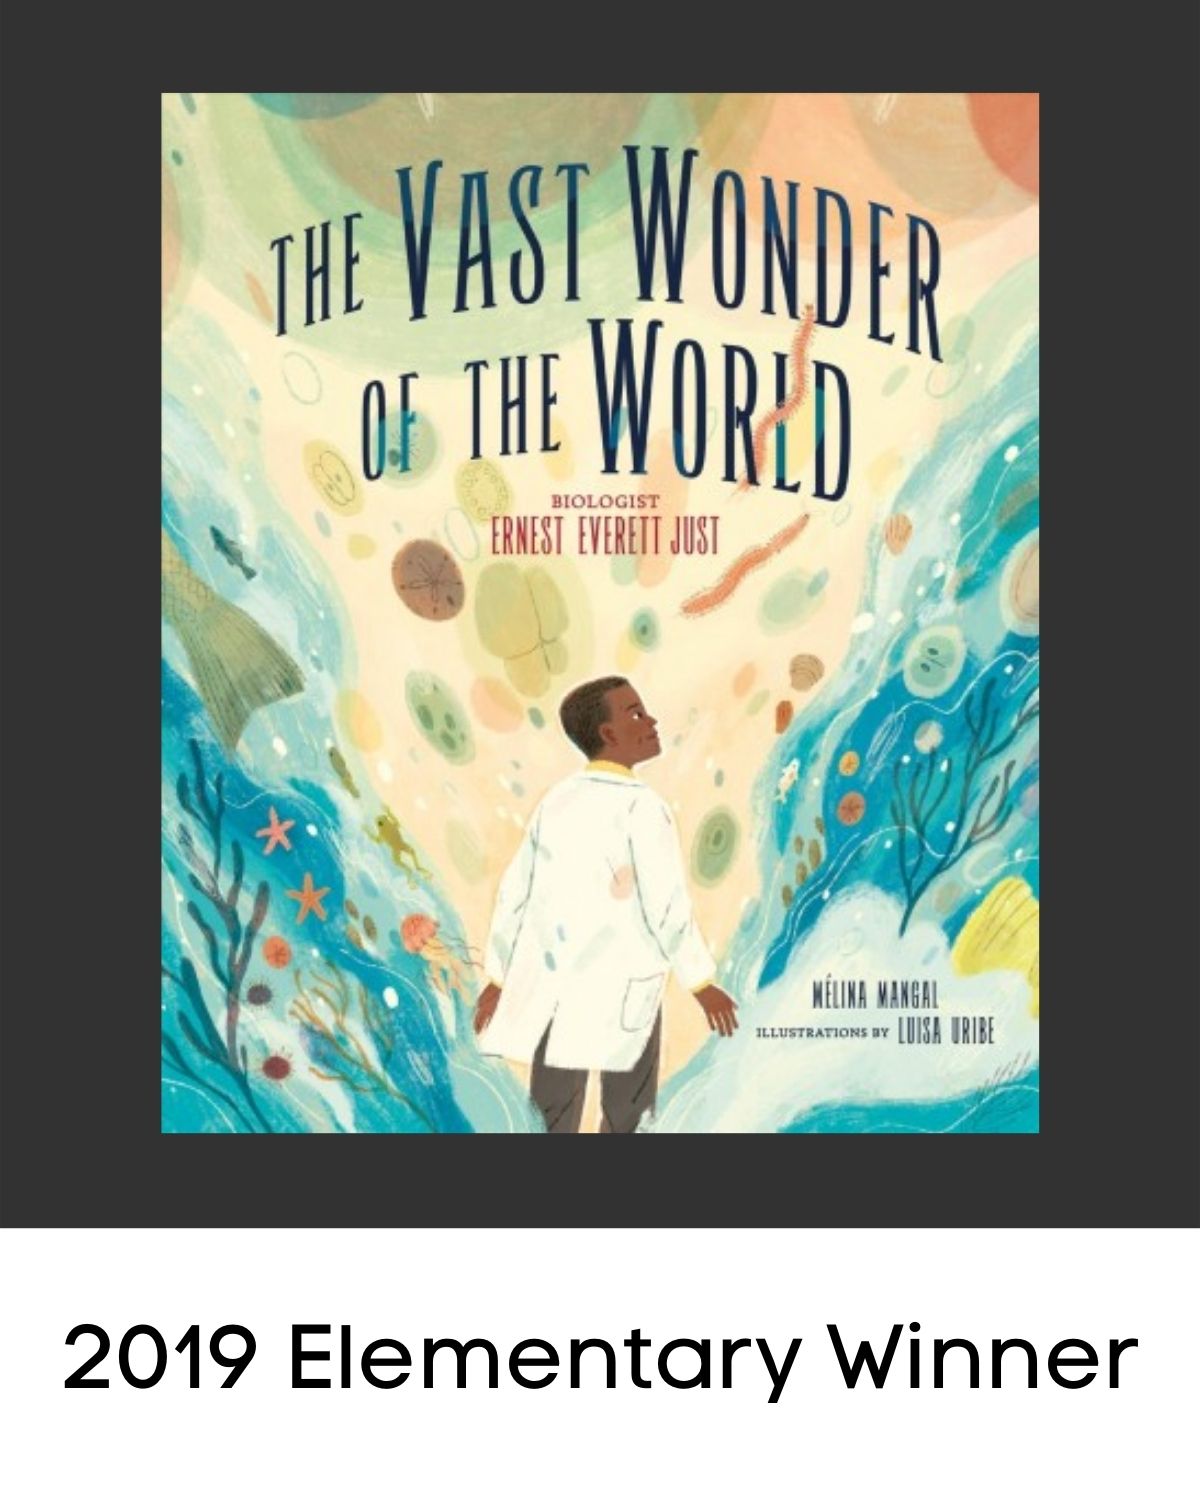 The Vast Wonder of the World book cover